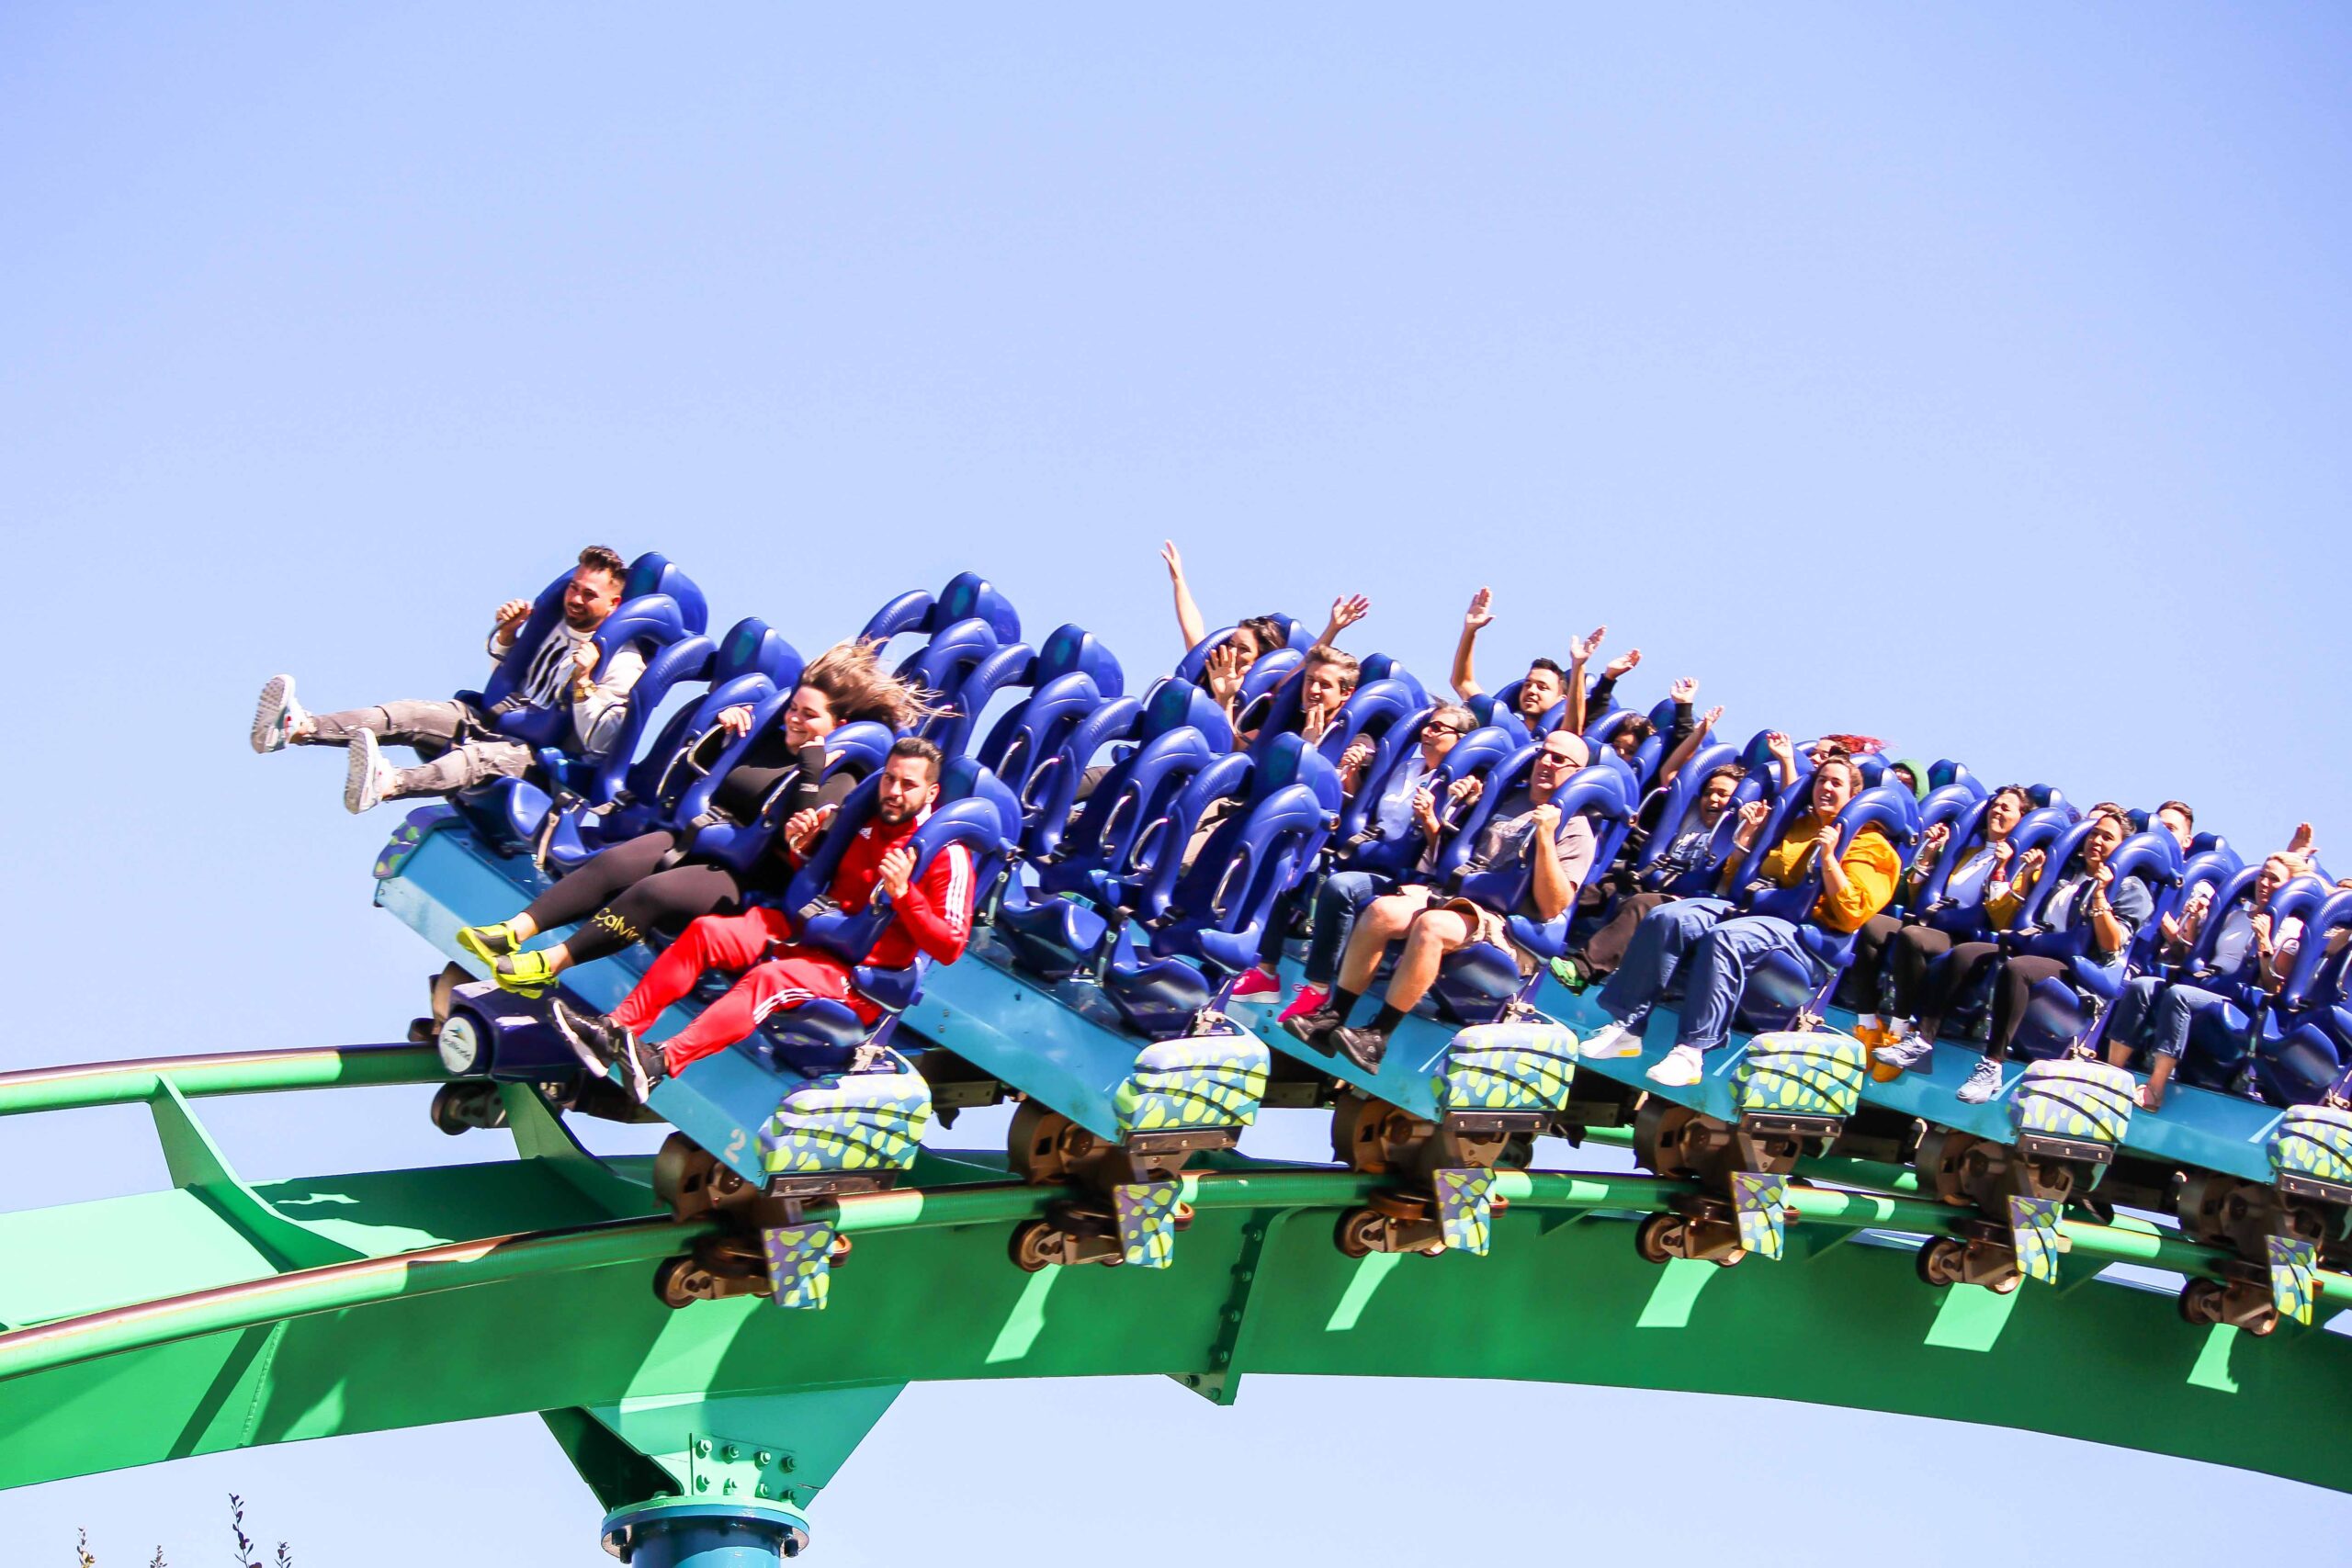 SeaWorld Discount Tickets – Save $195 On Tickets